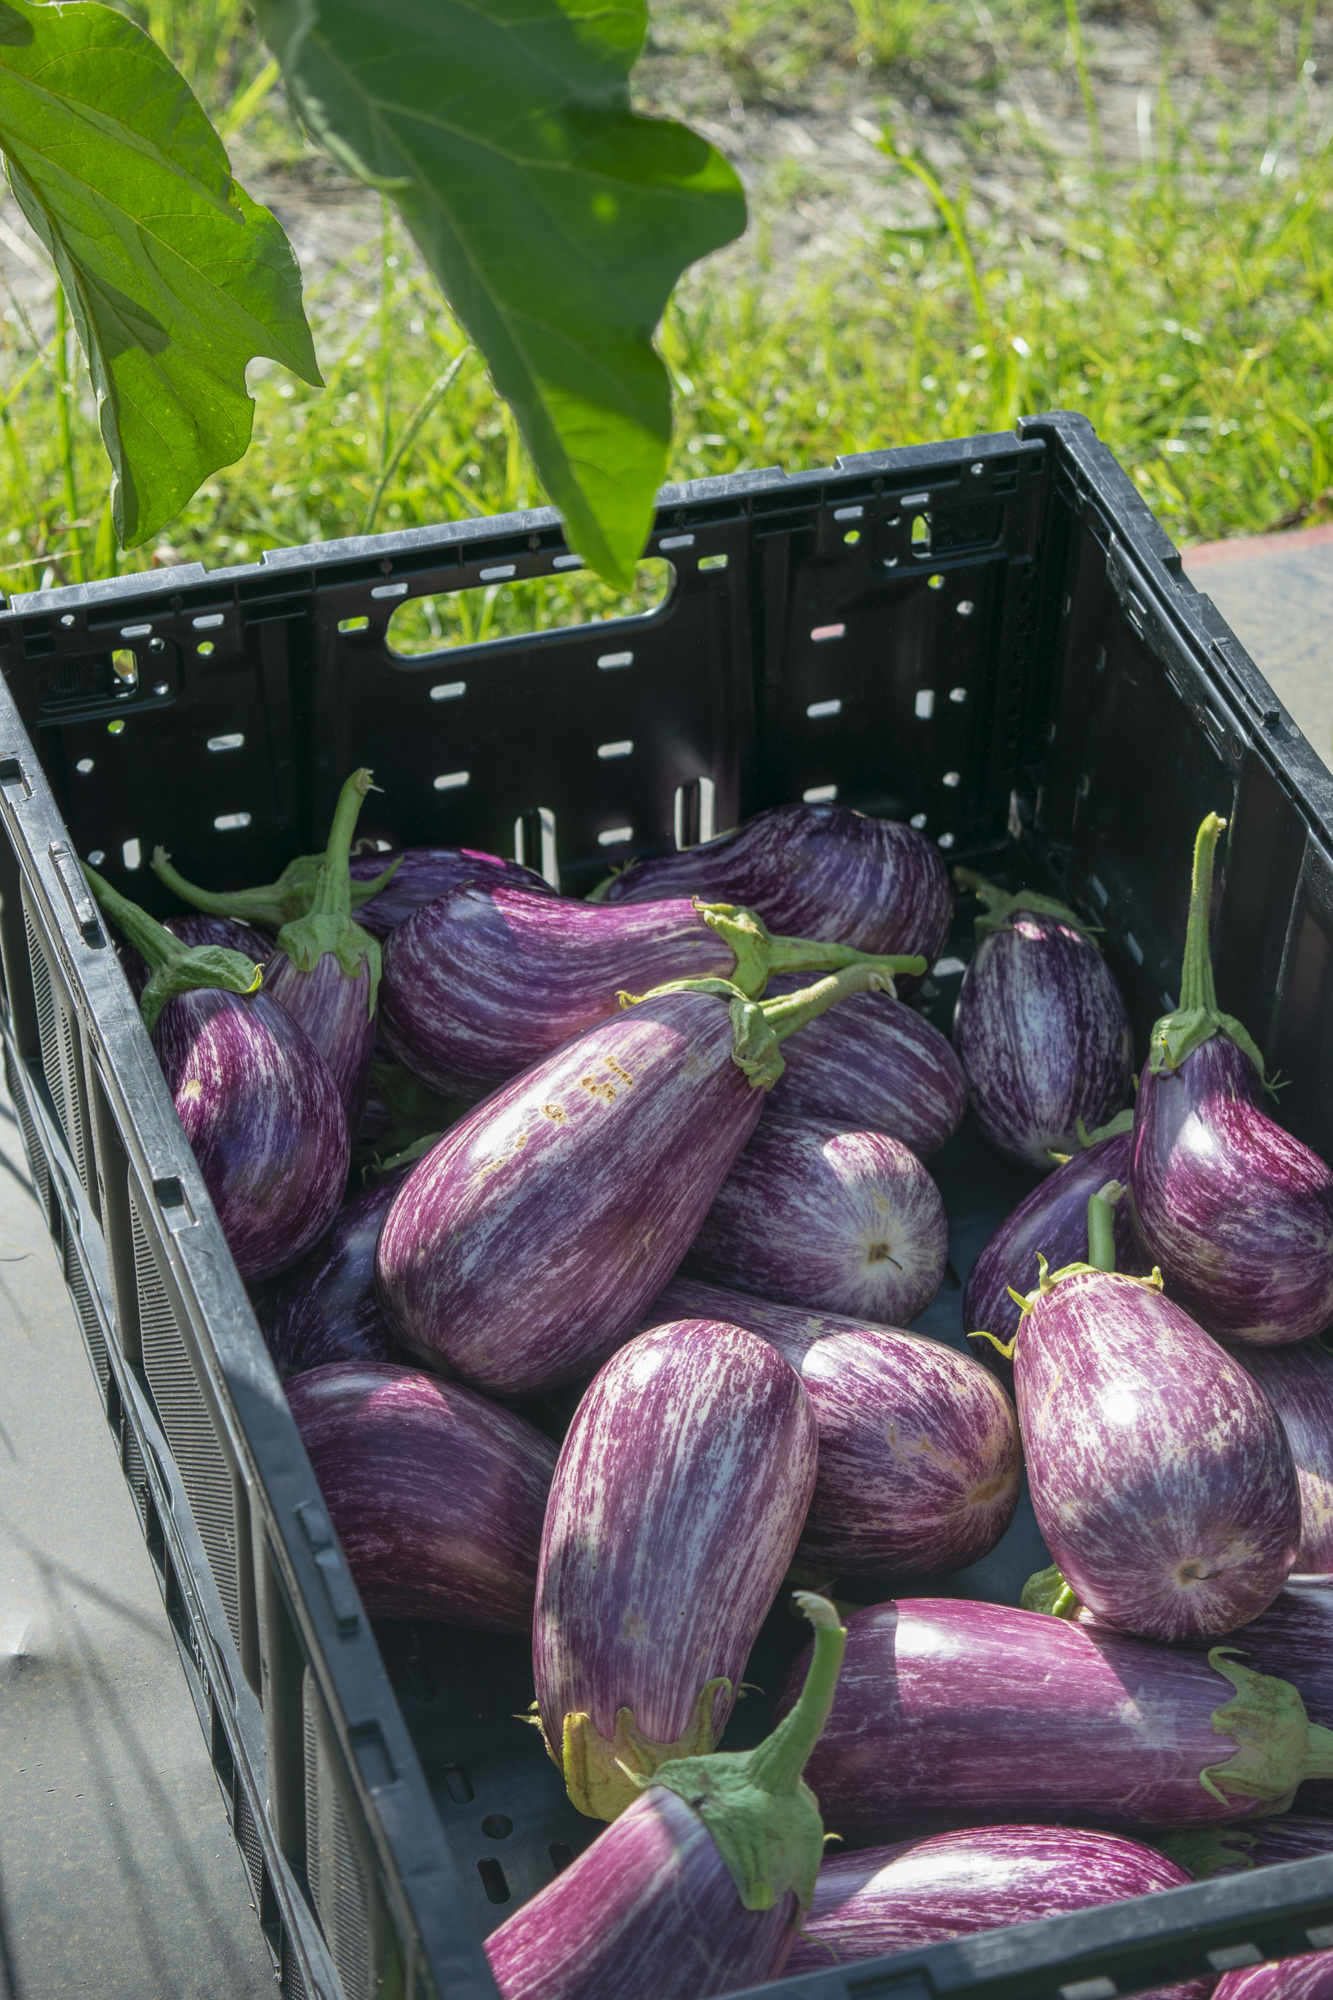 If not for the Transition gleaning, these eggplant would be left to rot in the field or tilled back into the soil.